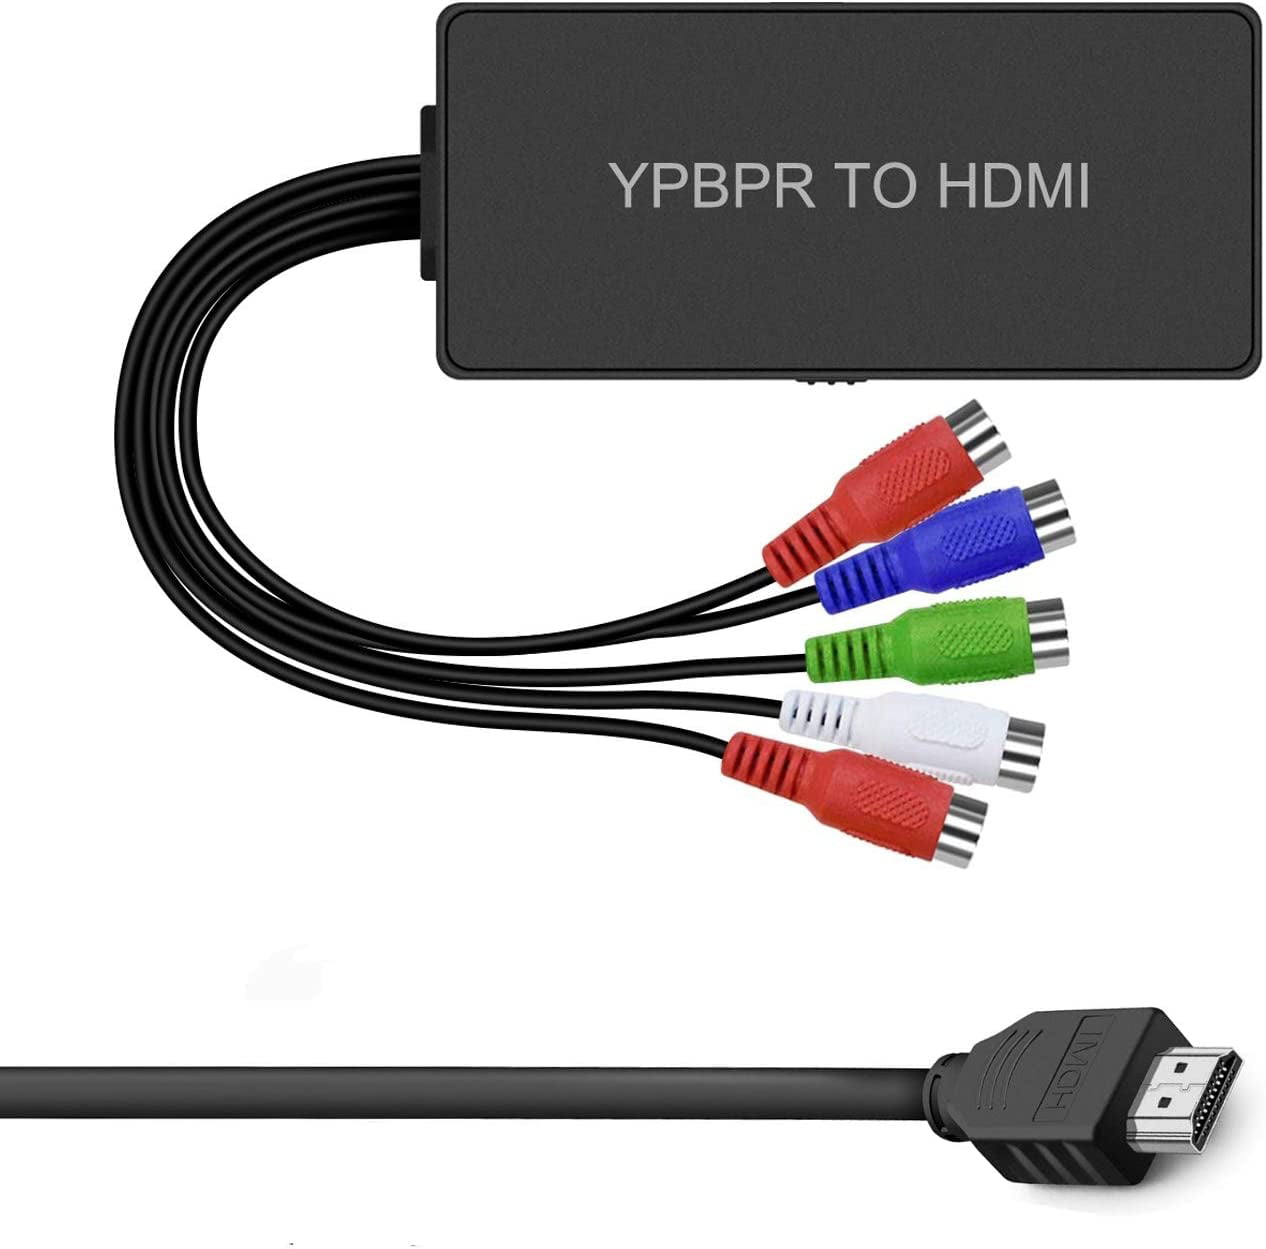 1080P YPbPr to HDMI Converter, 5RCA Video Audio to HDMI Support 1080P for DVD, VCD, PSP, PS2, Xbox 360, Nintendo NGC to New HDTV Monitor or Projector. - Walmart.com